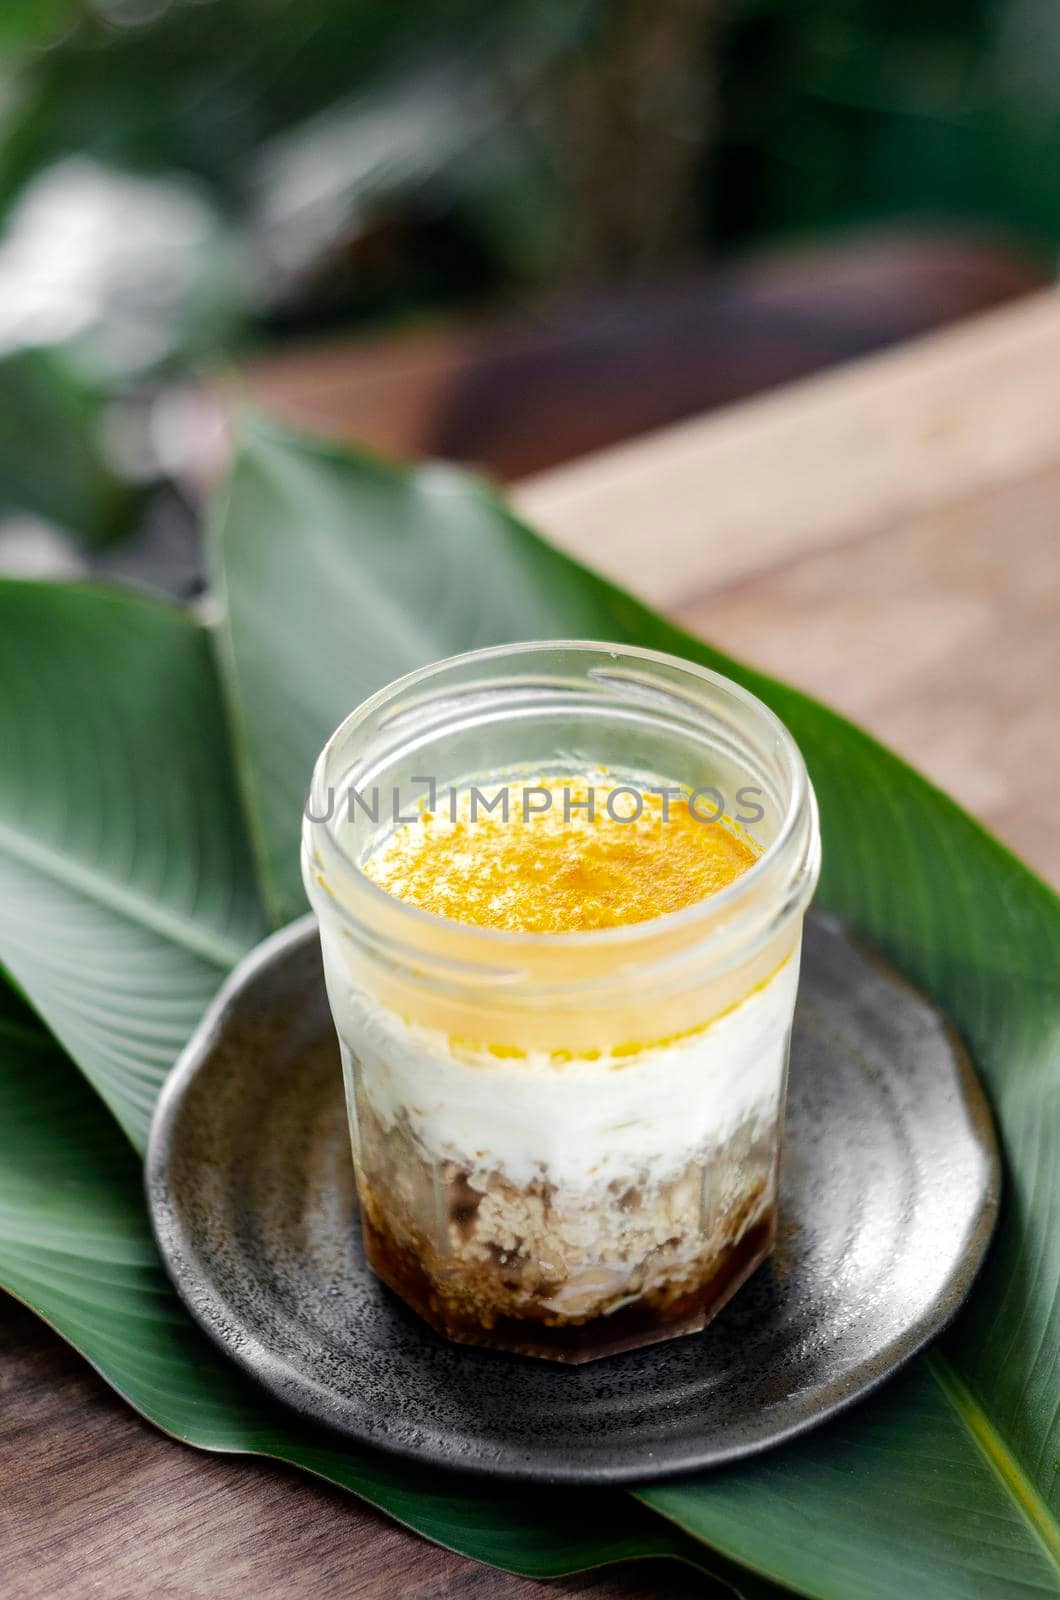 granola, coconut mousse, dates and turmeric powder healthy vegan dessert in rustic outdoors setting